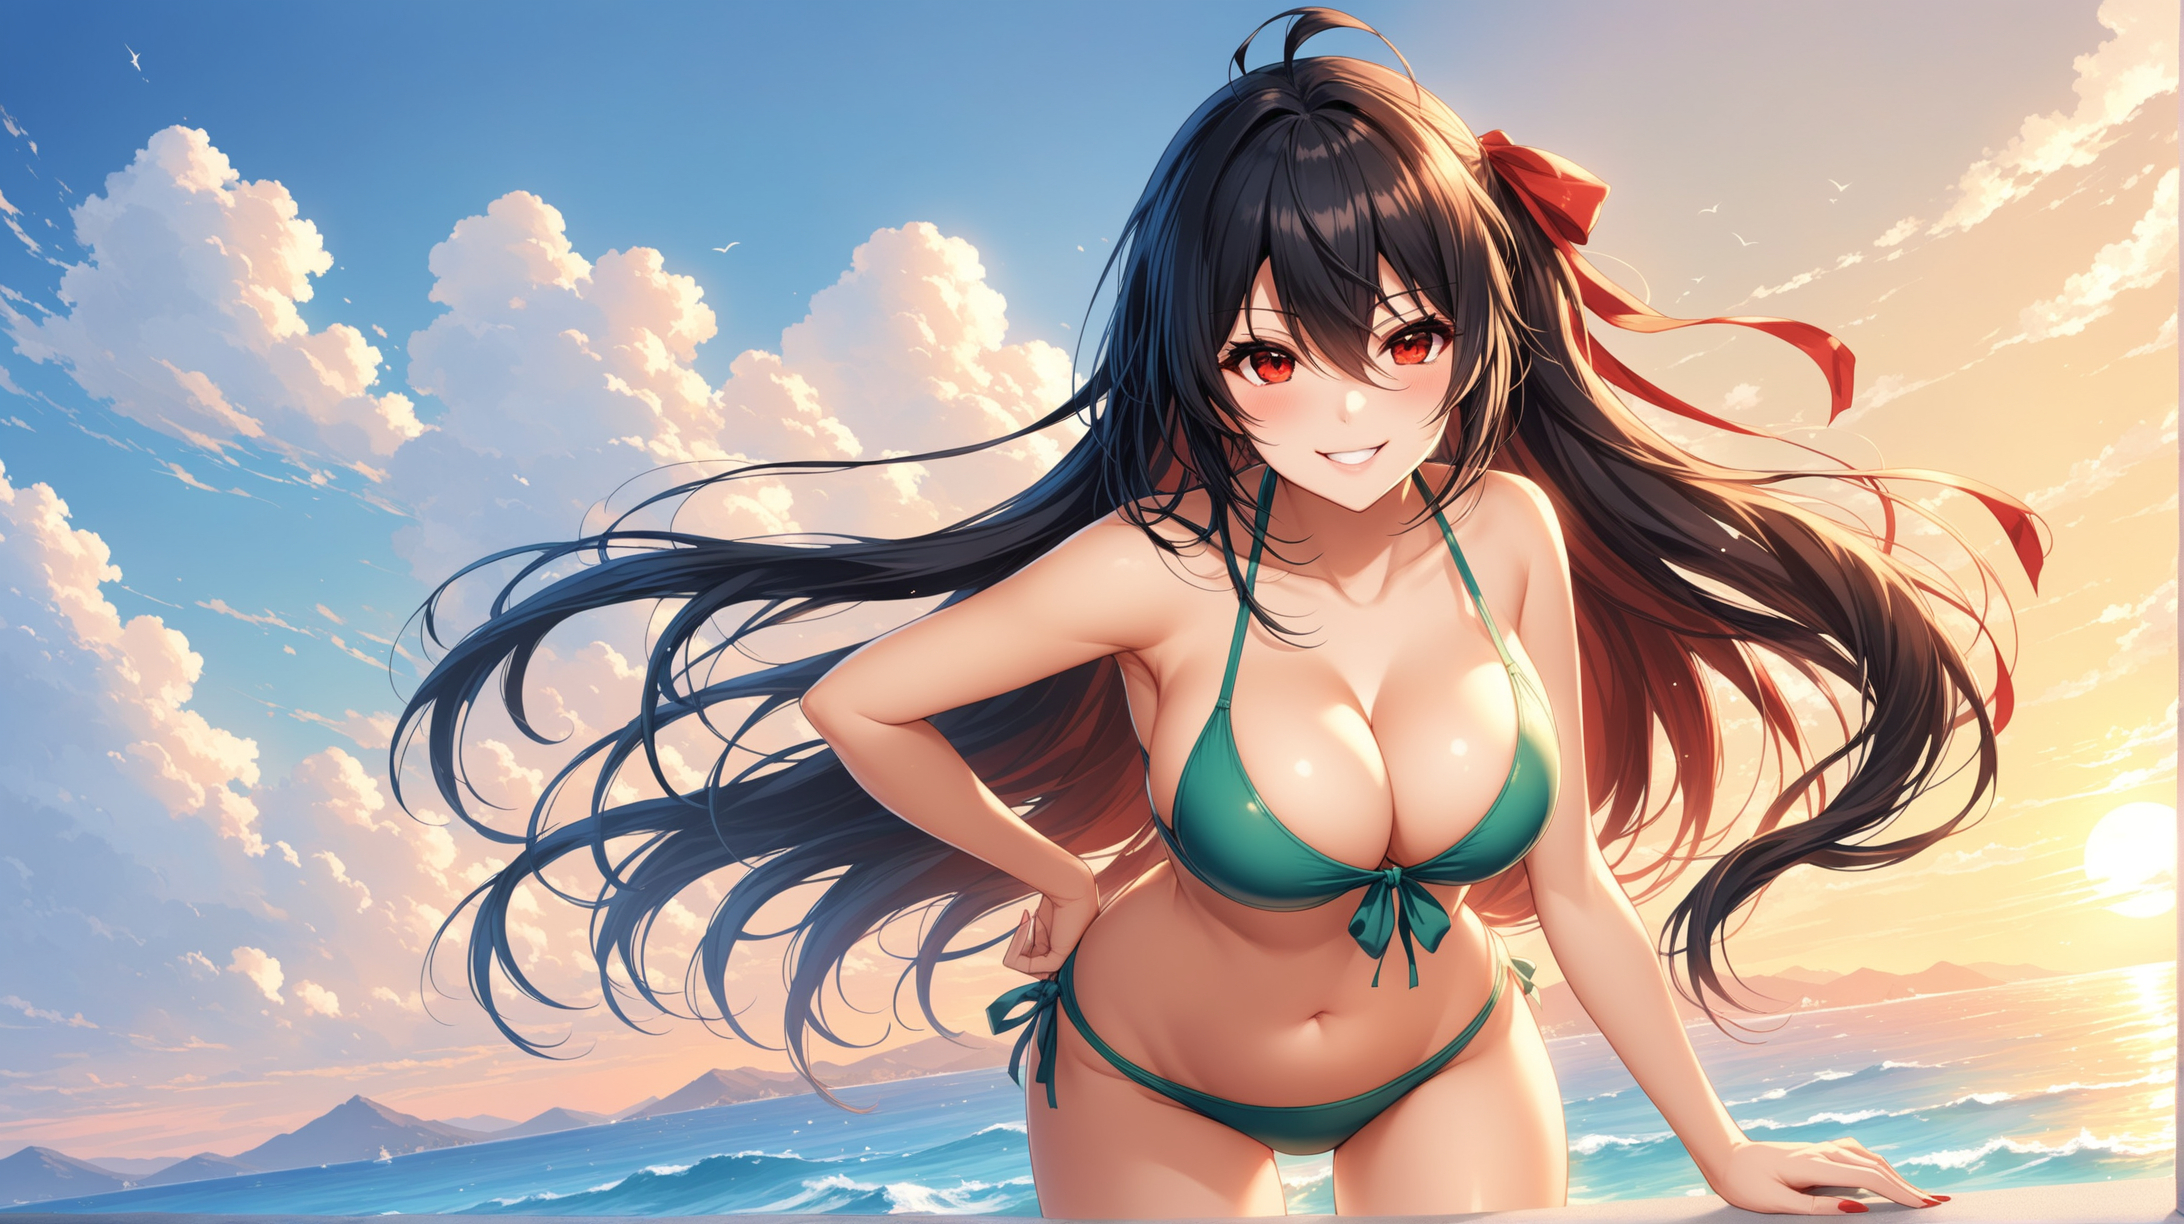 Draw the character Taihou from Azur Lane, red eyes, long hair, high quality, in a cheerful pose, outdoors, swimsuit, smiling at the viewer